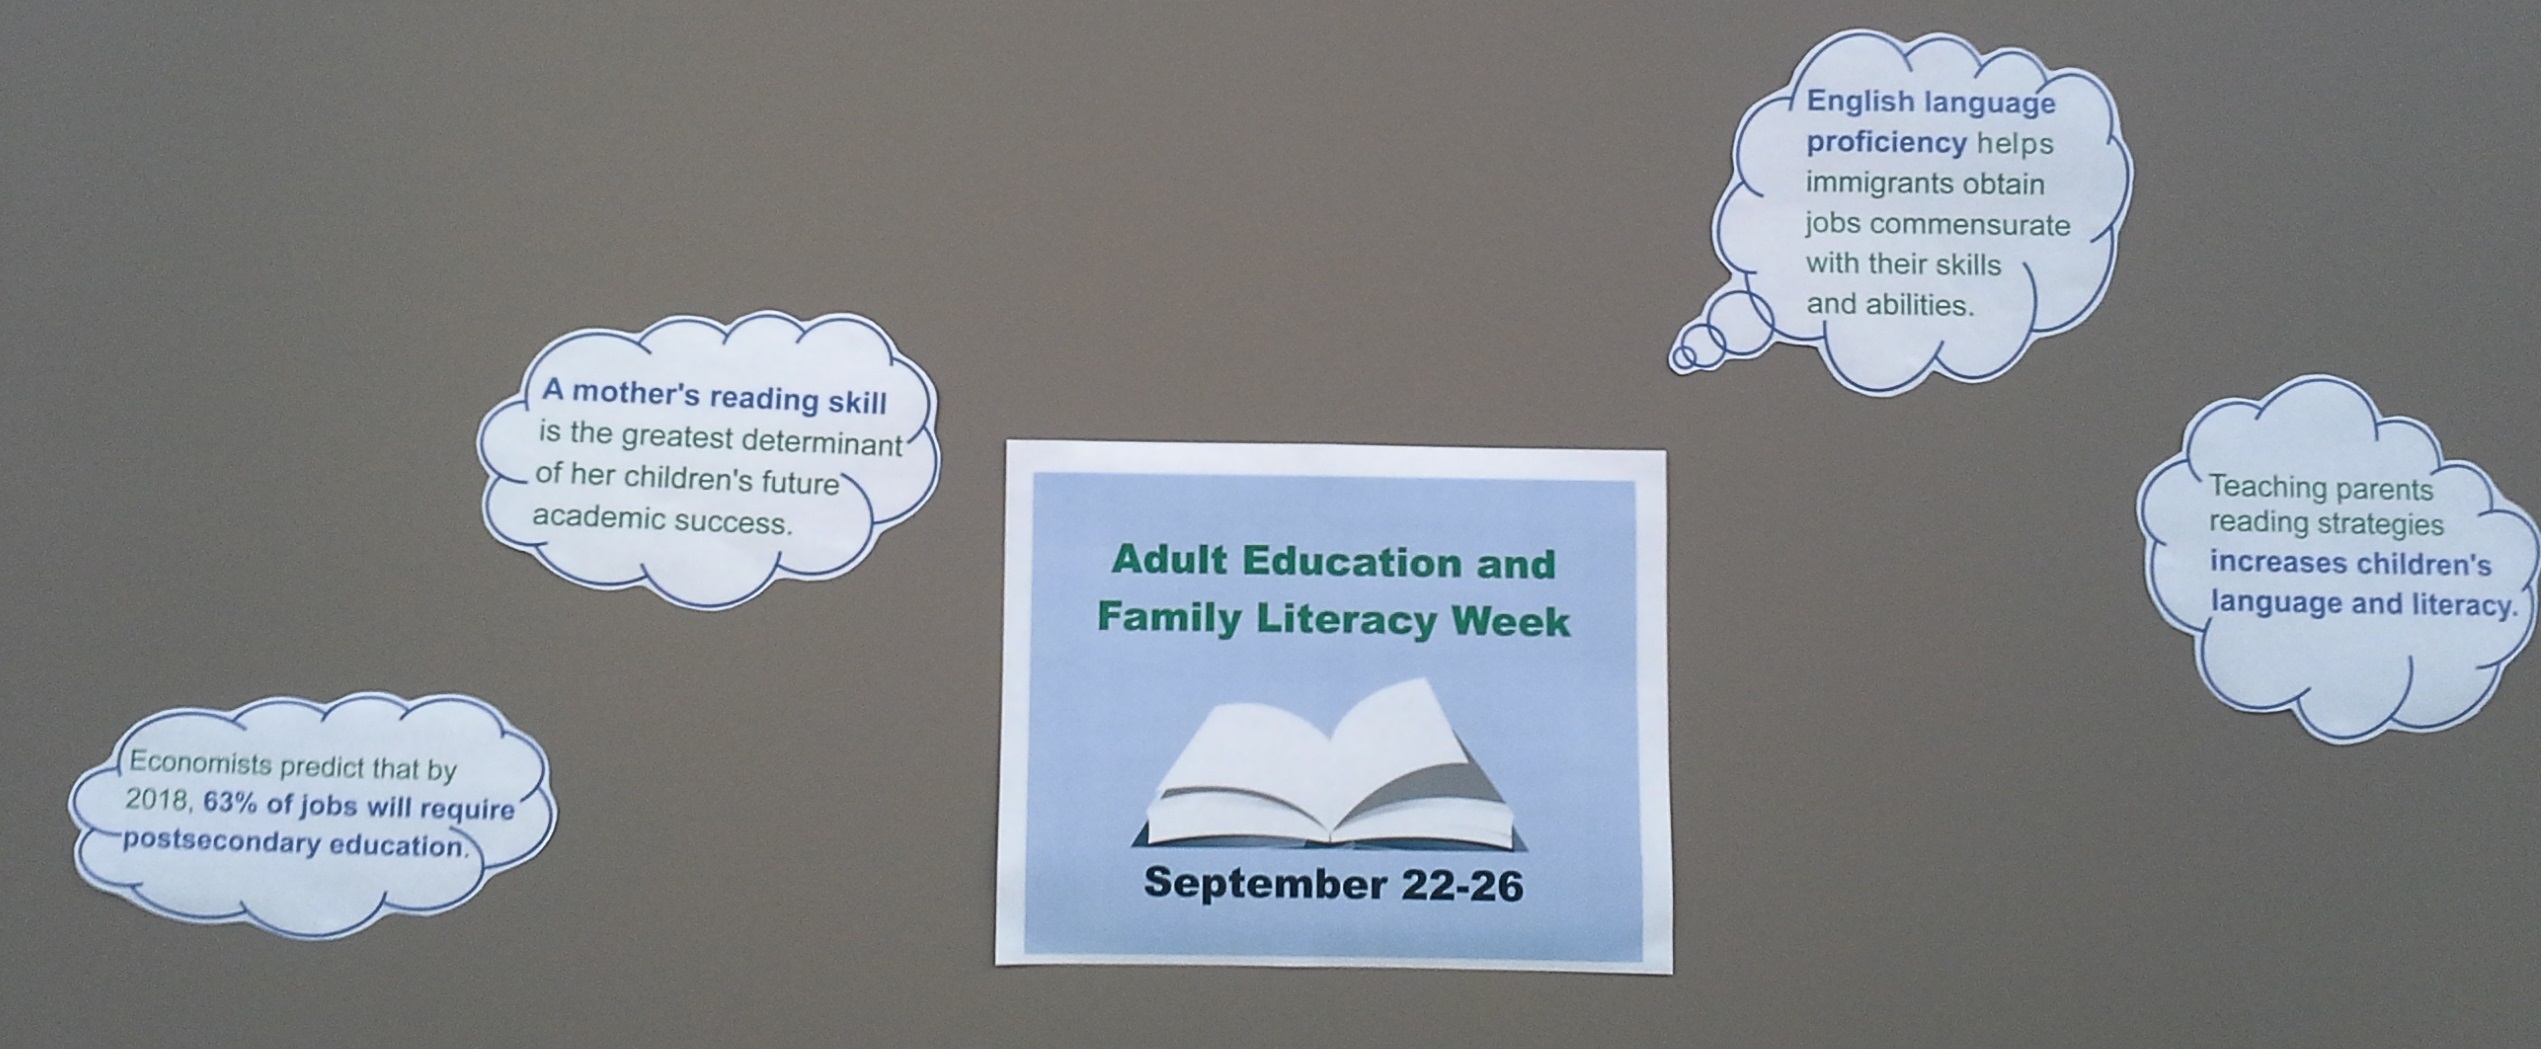 Adult Education and Family Literacy facts